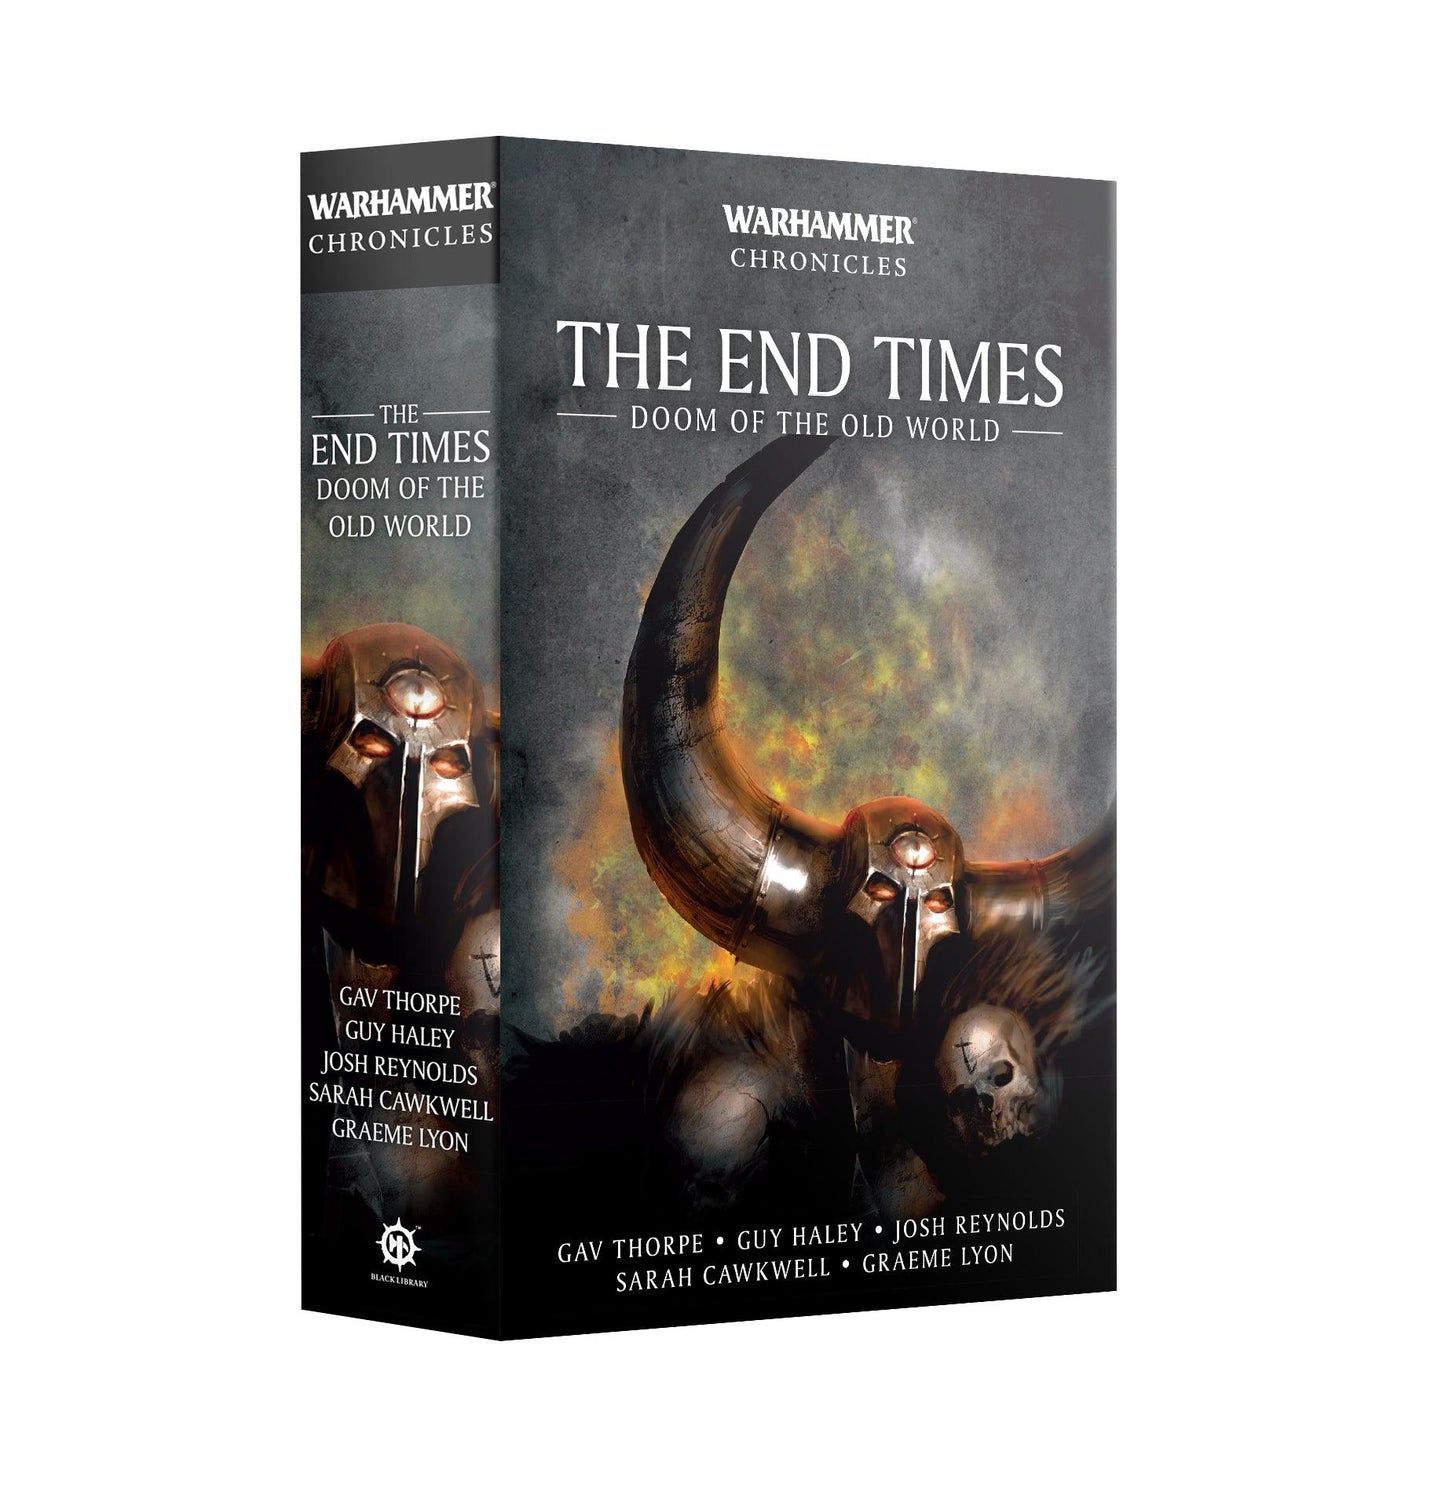 WARHAMMER CHRONICLES: THE END TIMES - DOOM OF THE OLD WORLD - ZZGames.dk